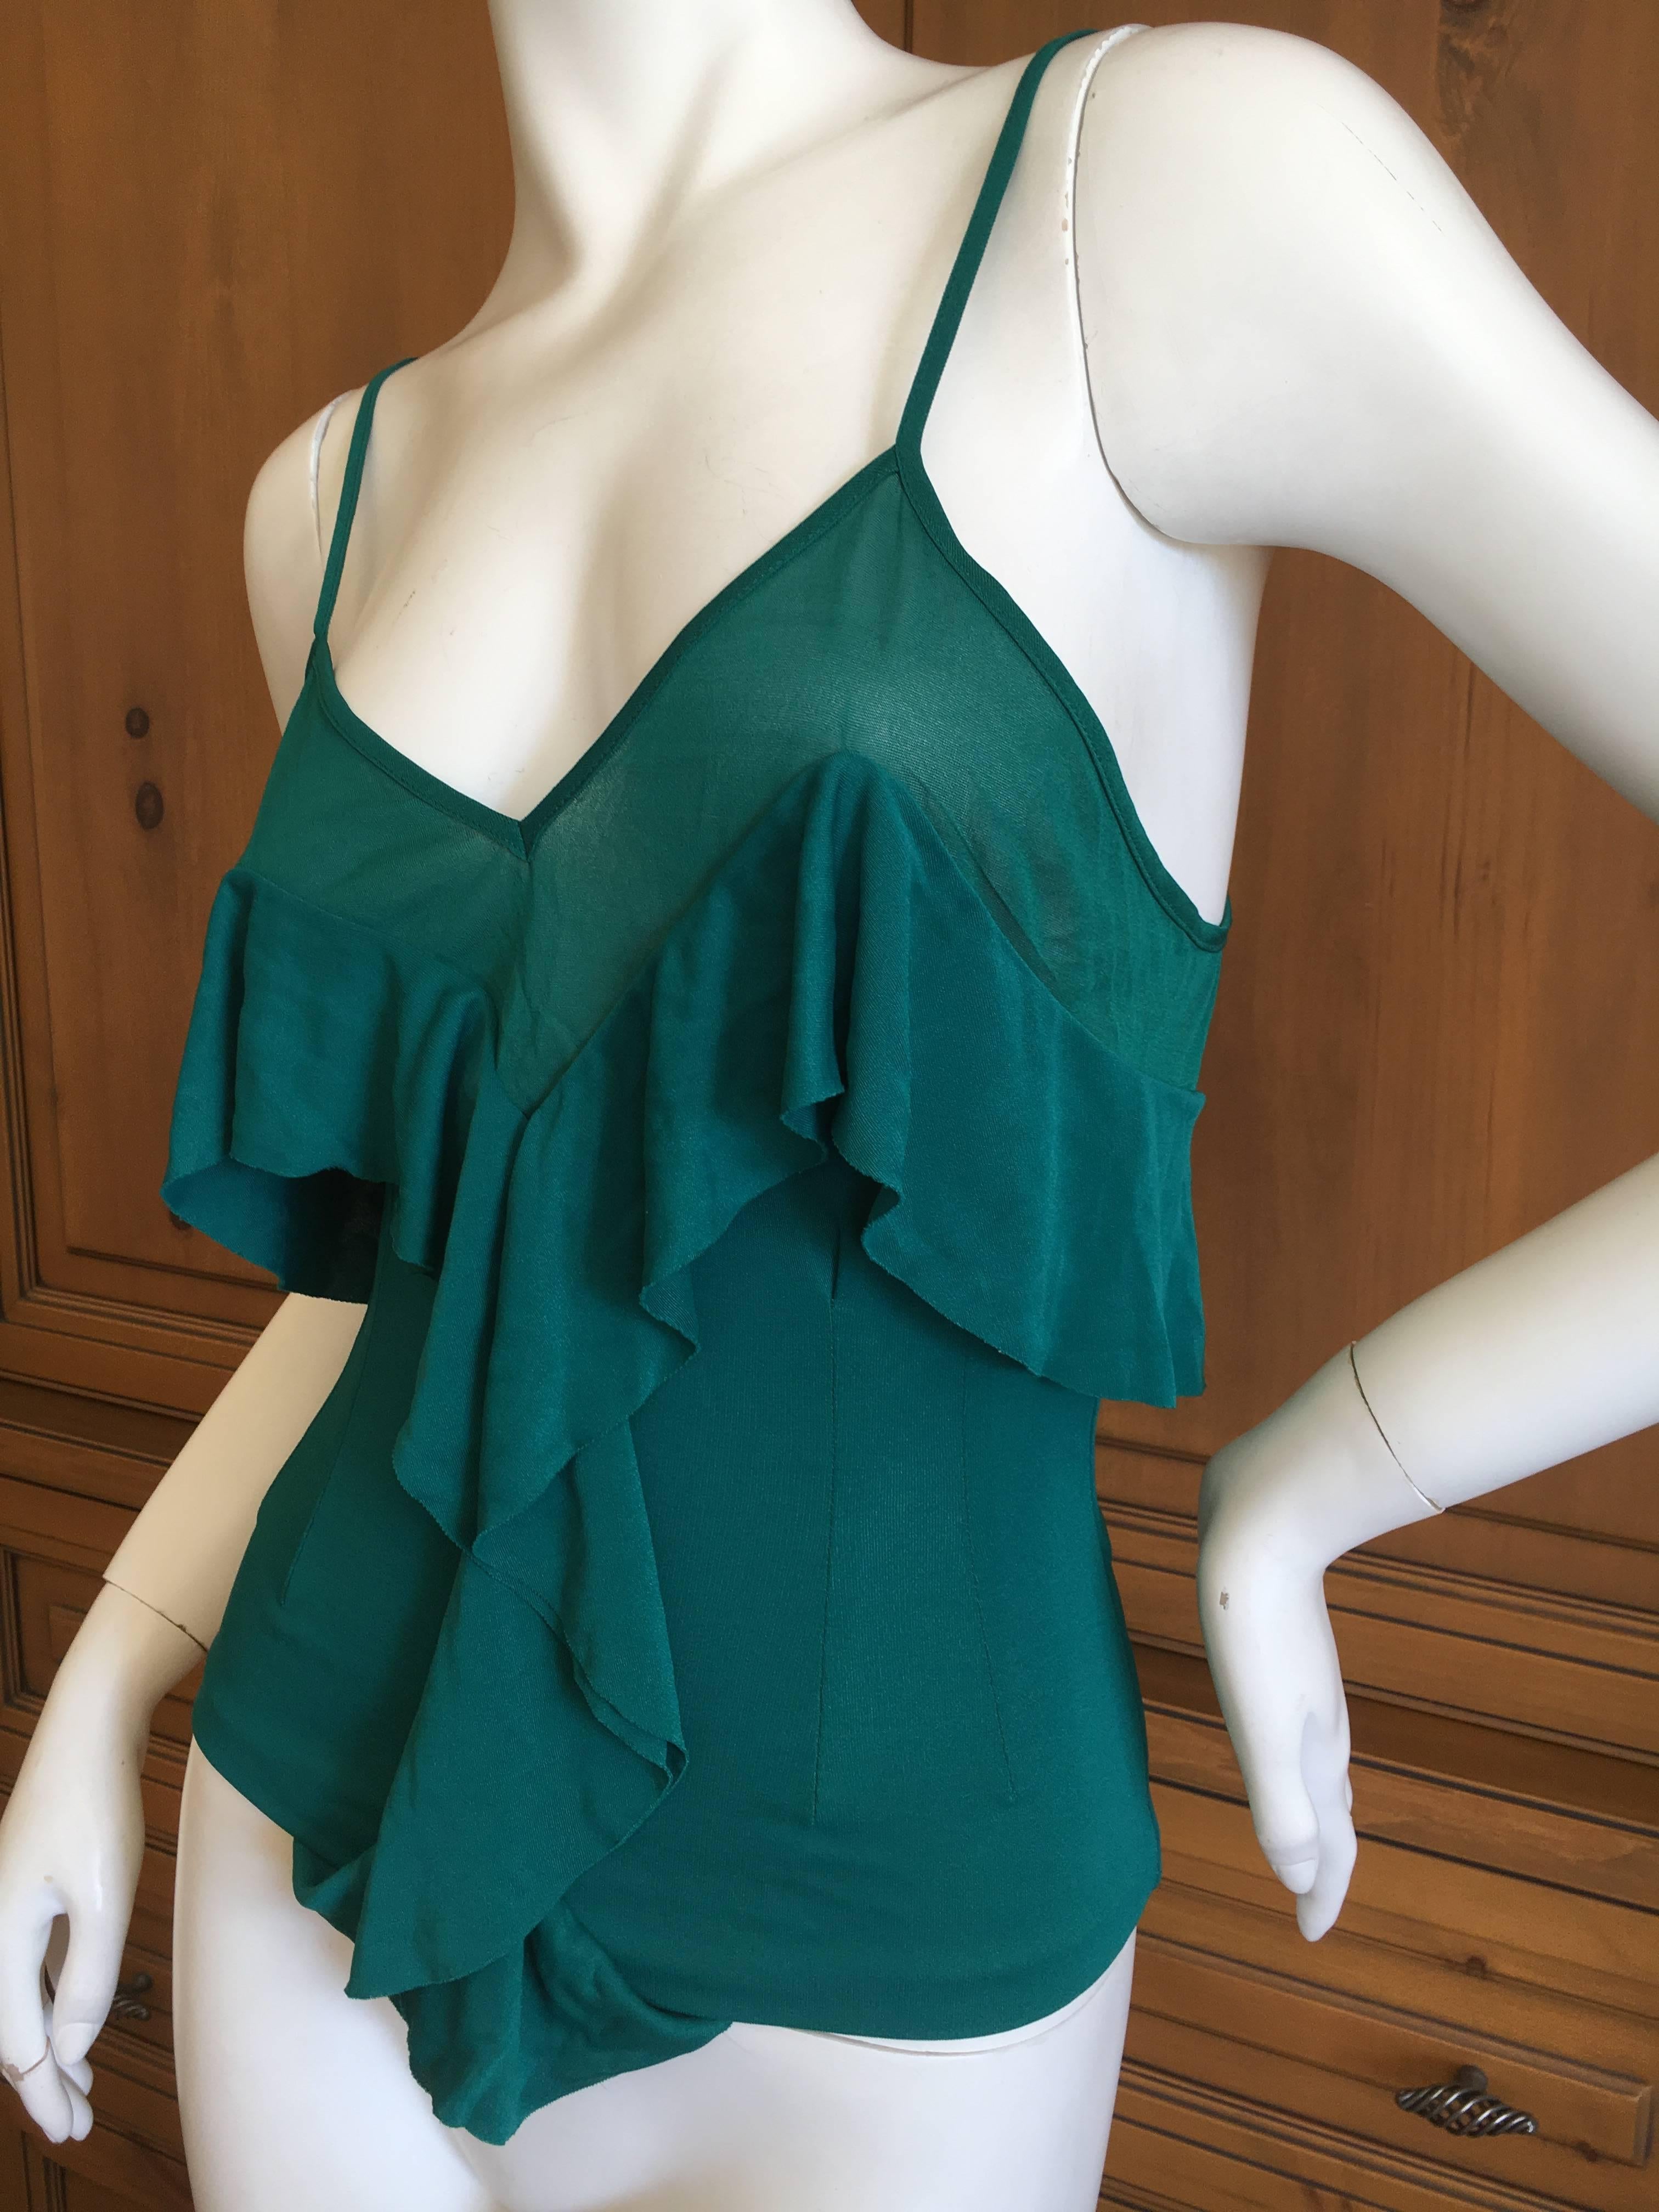 Women's Yves Saint Laurent Fall 2003 by Tom Ford Green Silk Ruffle Top New with Tags